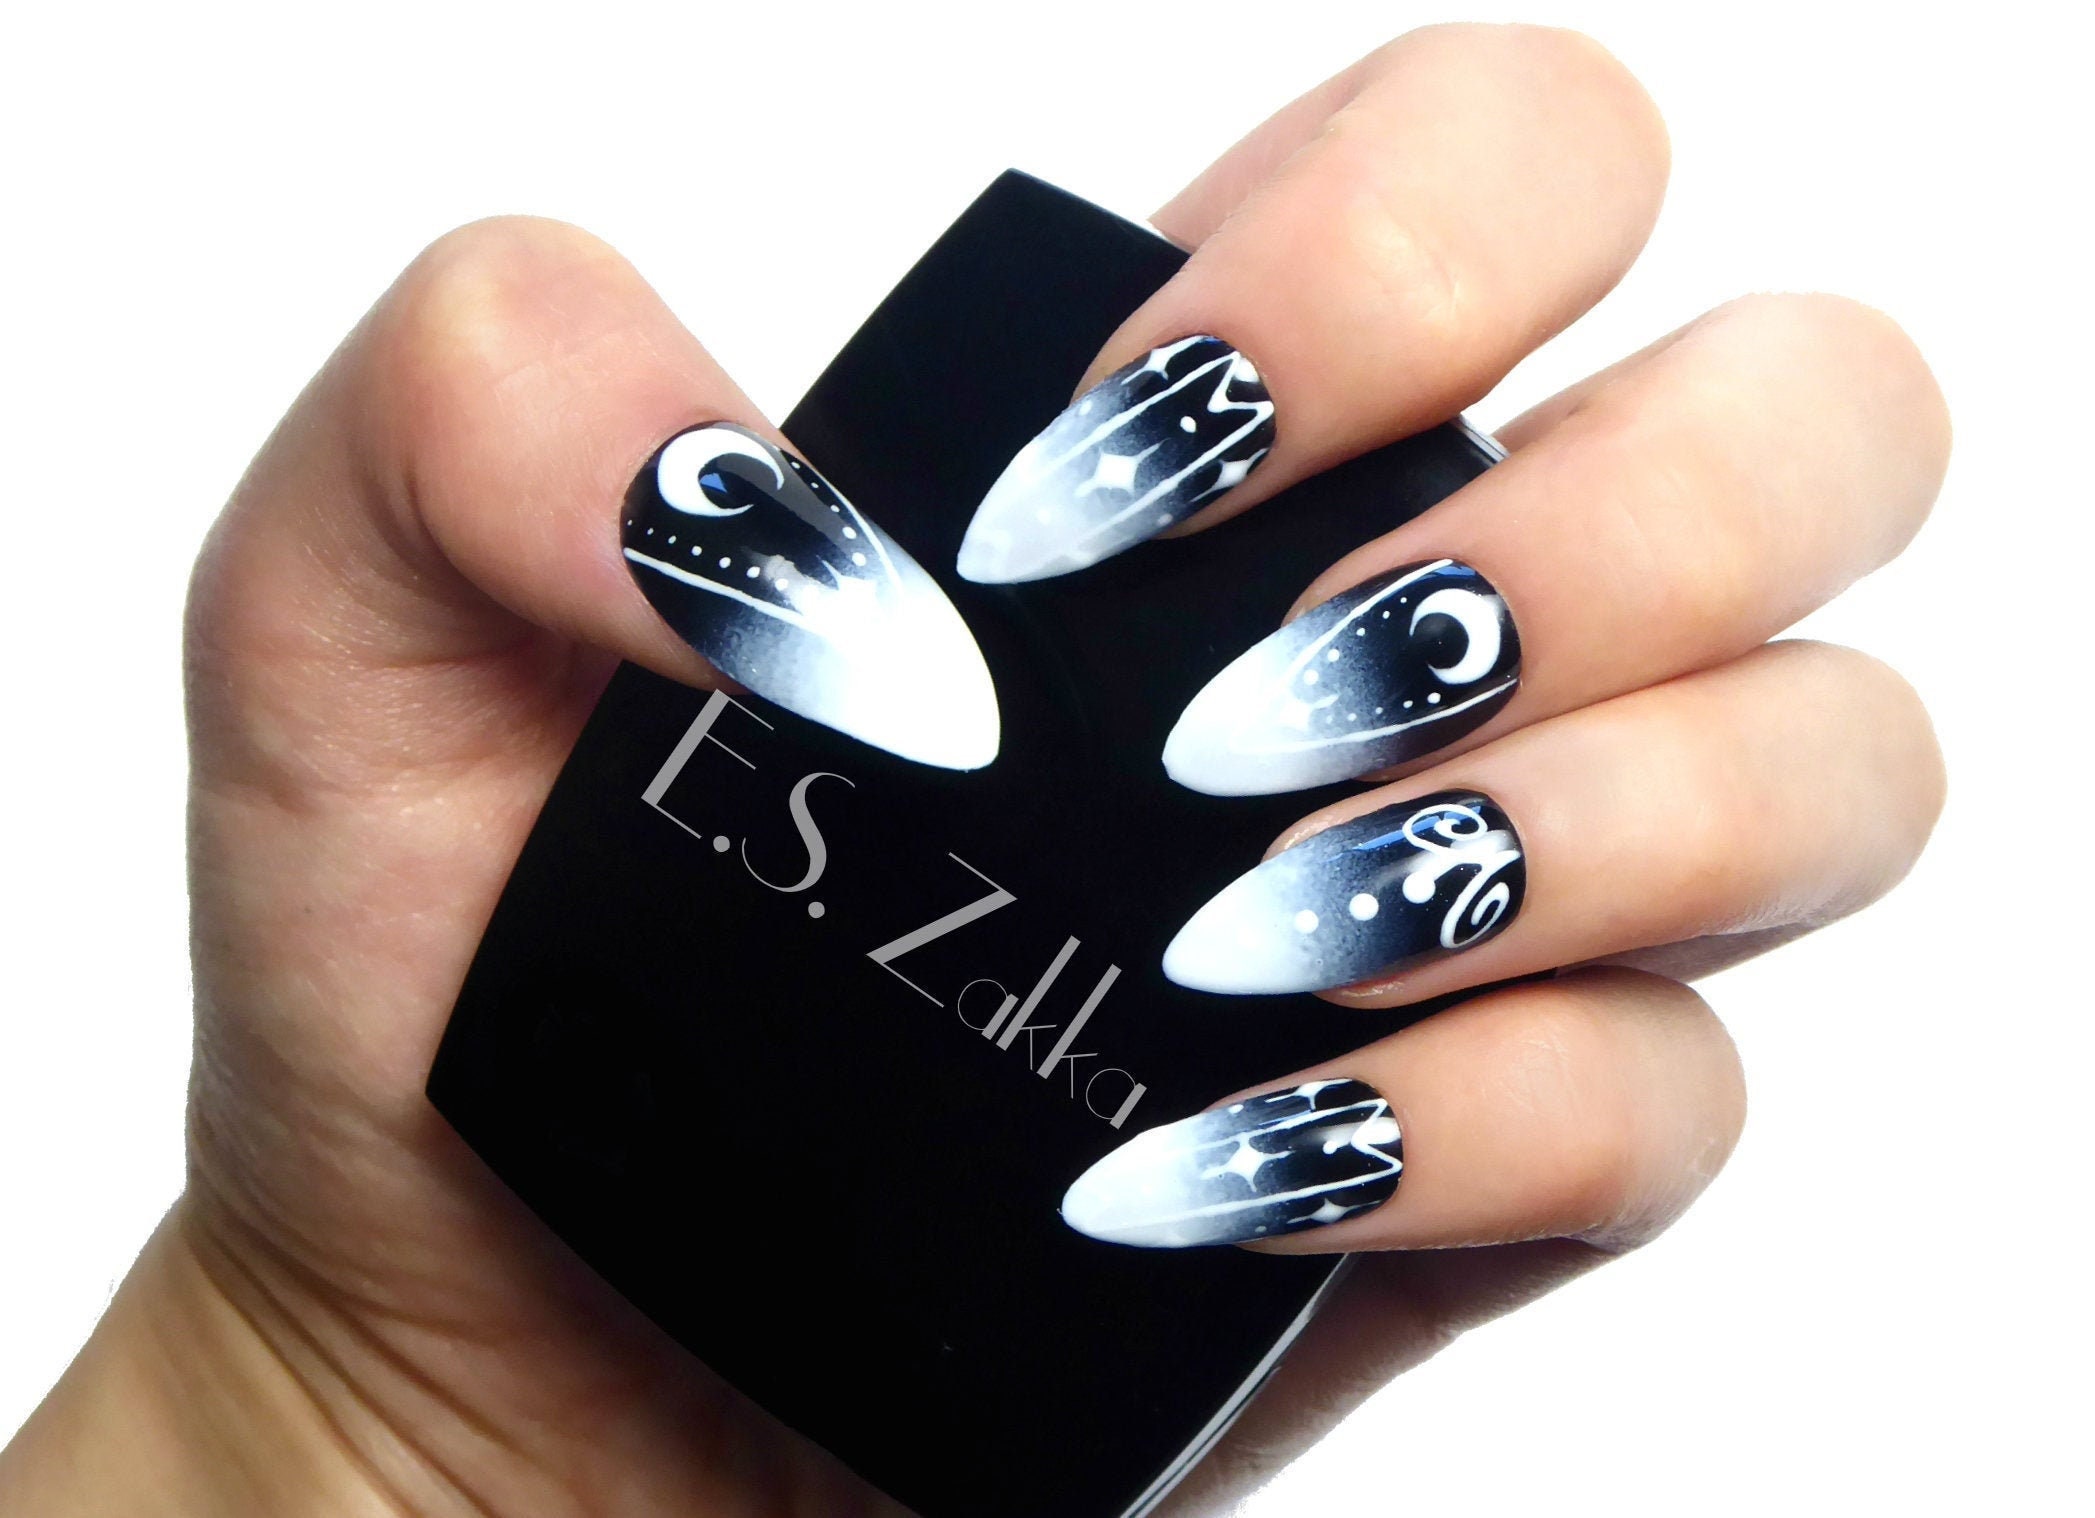 6. Wiccan Nail Art Trends - wide 8